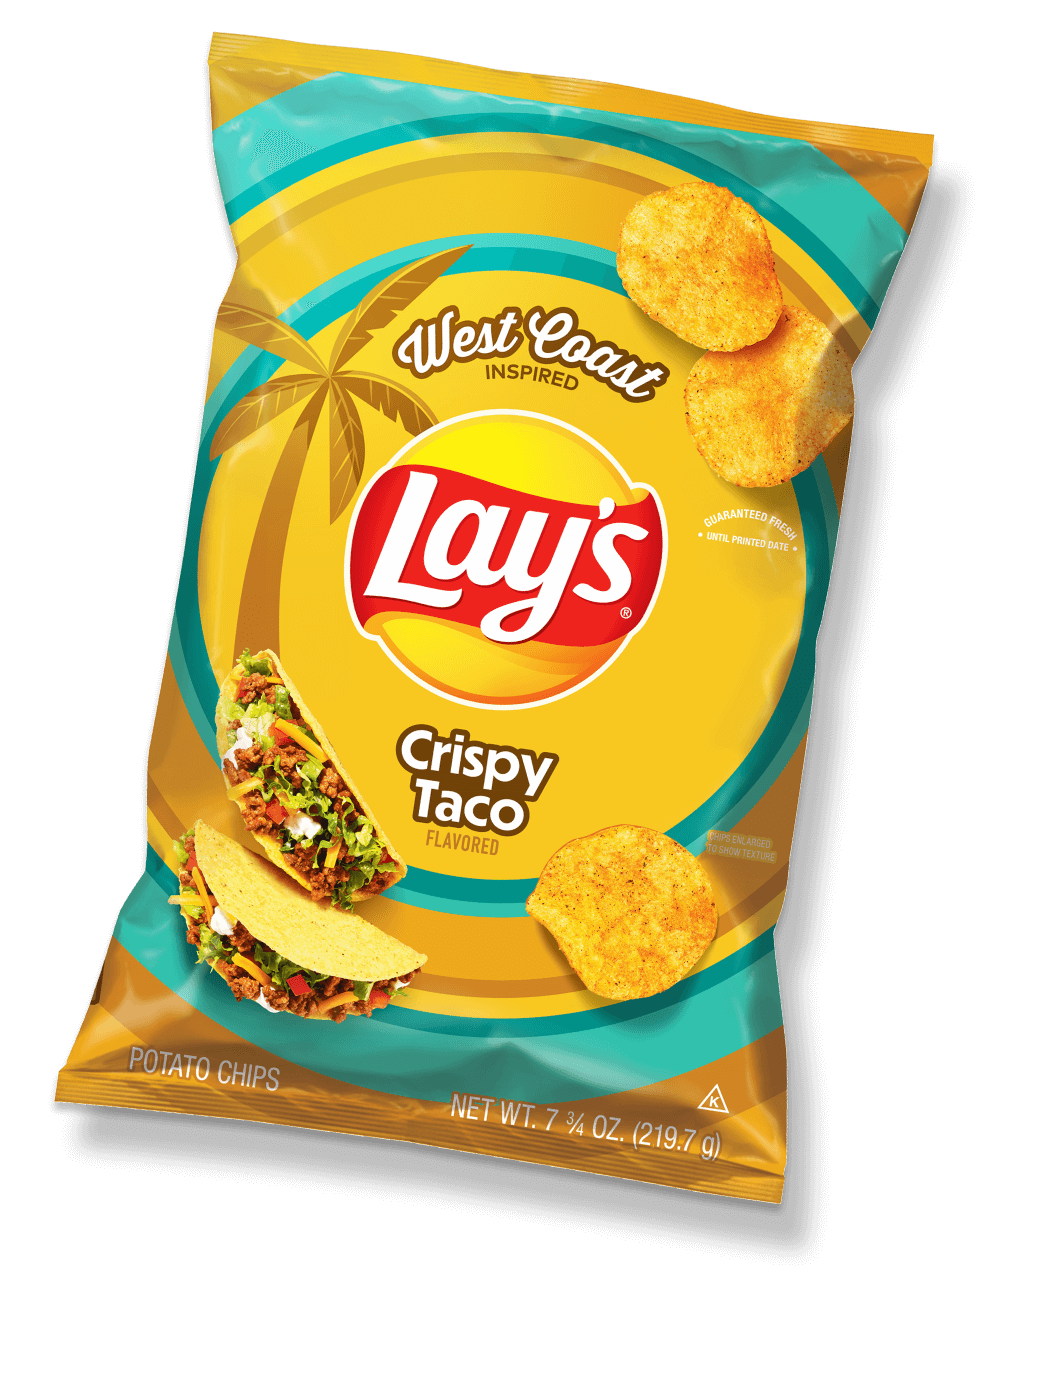 Lay's Crispy Taco flavored chips bag picture.